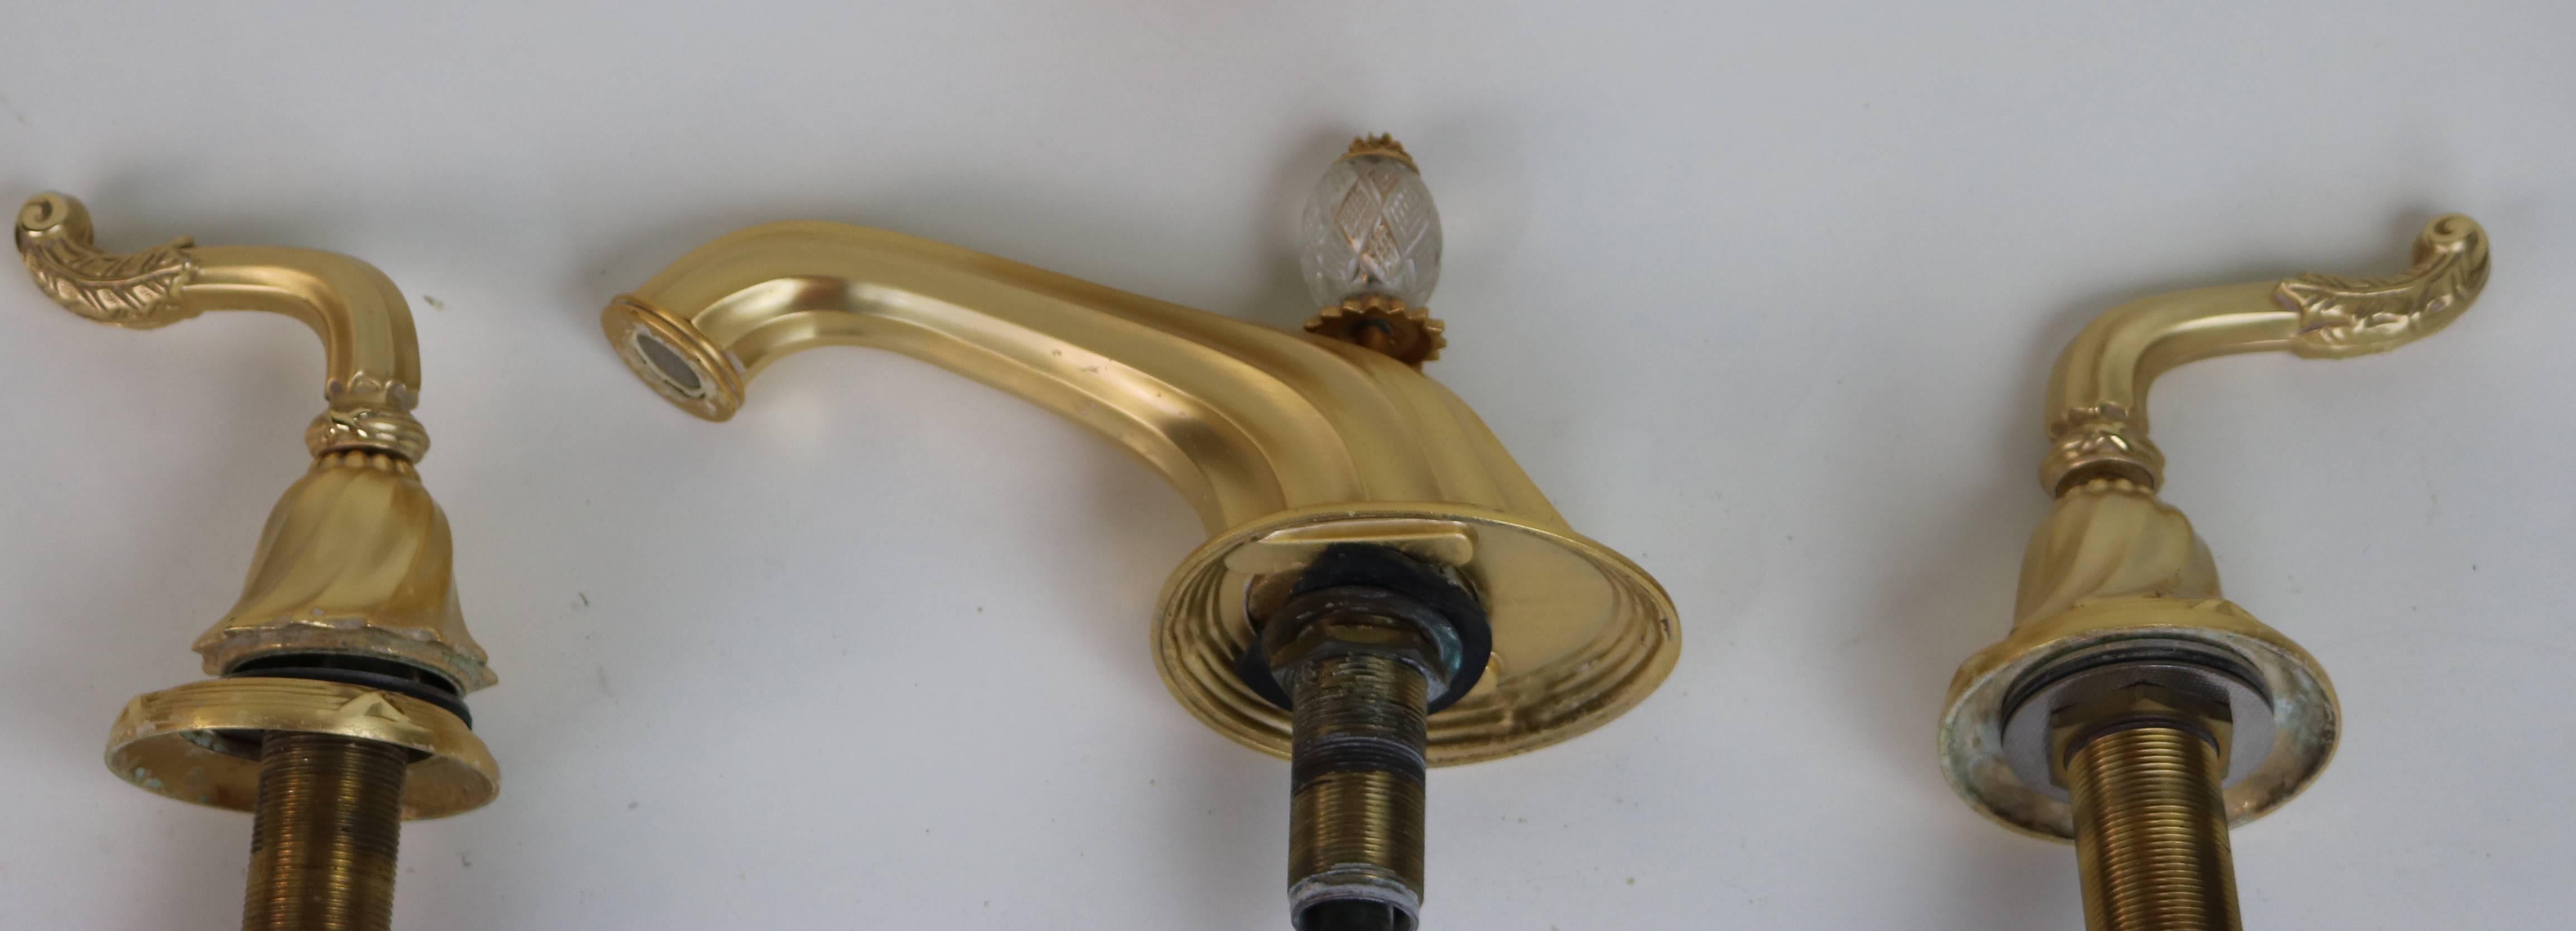 Plated Sherle Wagner Shower Head 22-Karat Gold Plate For Sale